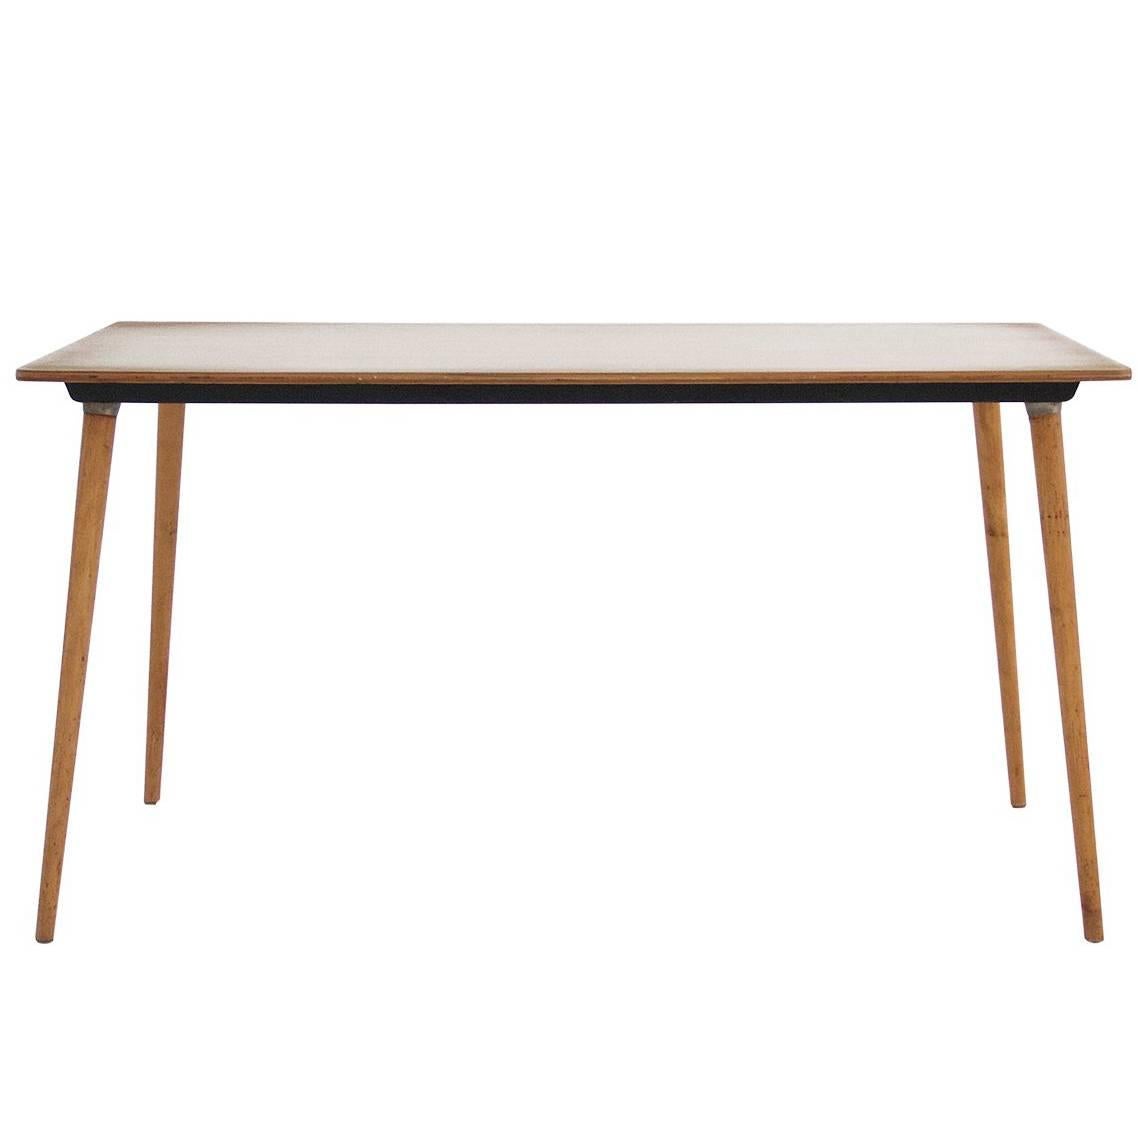 Rare Table Designed by Charles and Ray Eames, Birchwood, 1940s, United States For Sale